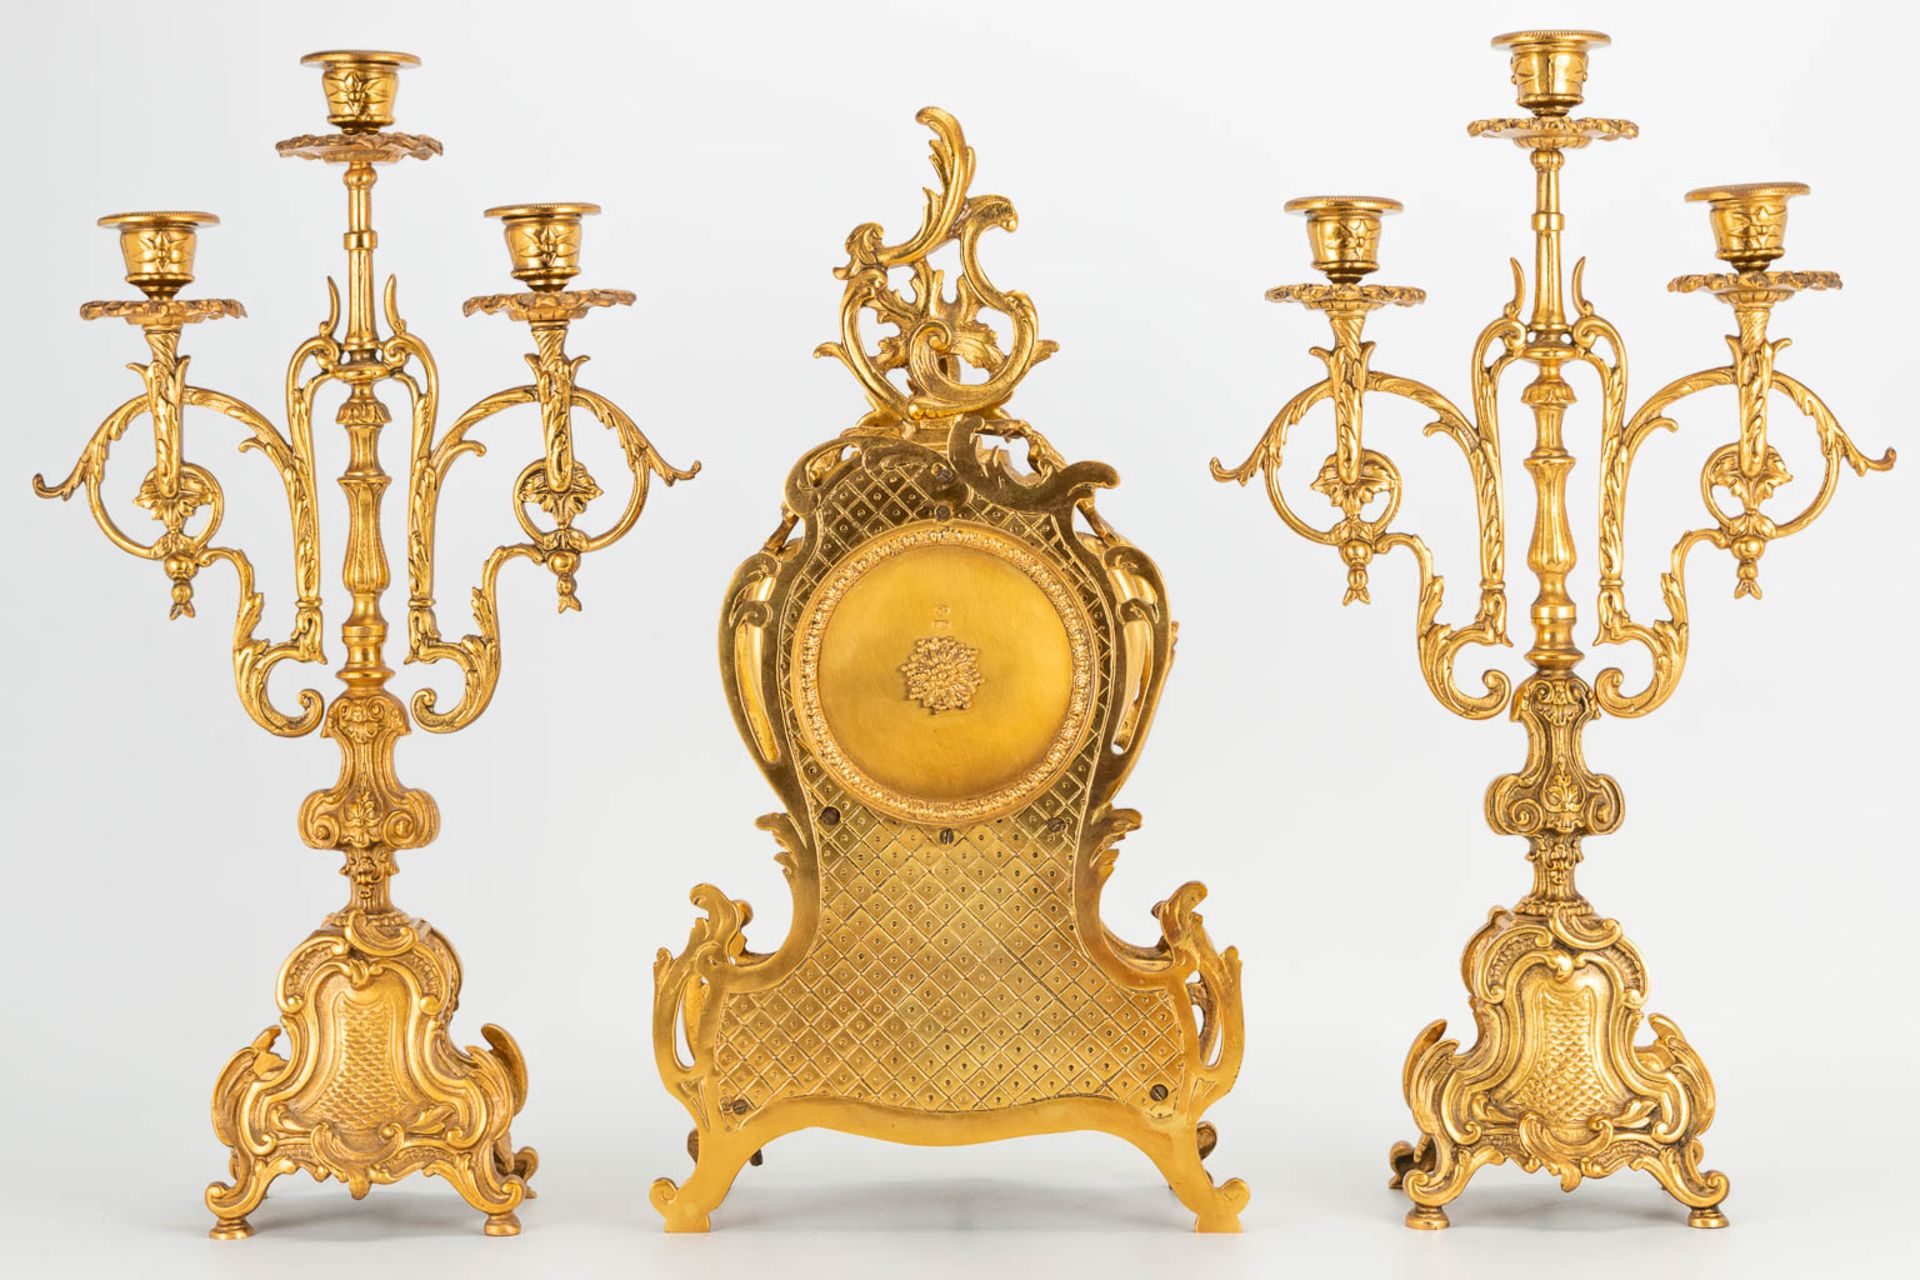 A 3 piece garniture clockset made of bronze, consisting of a clock and 2 candelabra. (9 x 22 x 41 cm - Image 9 of 17